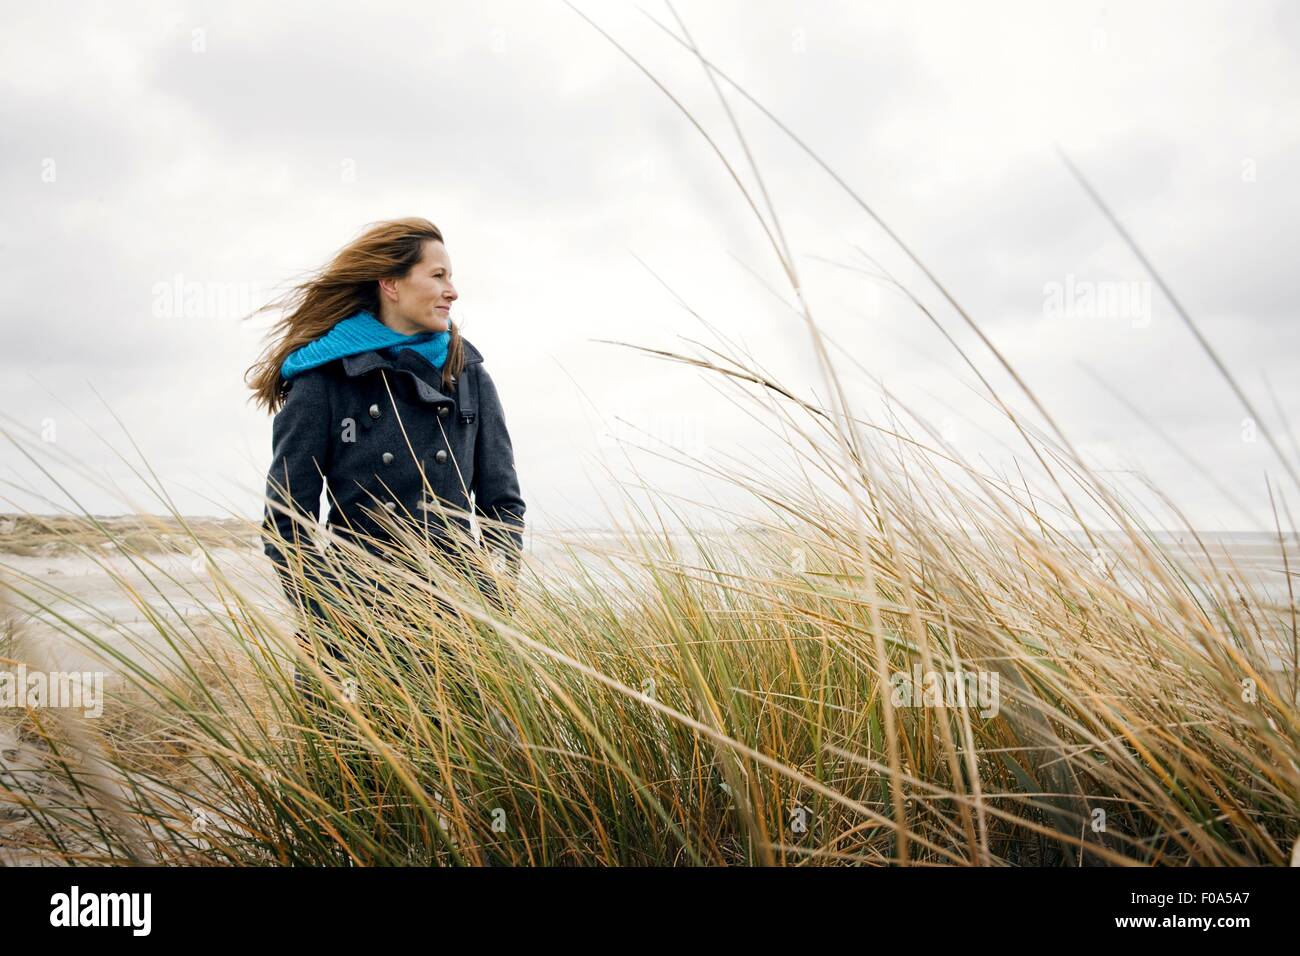 Woman wearing burberry coat standing relaxed between reeds on beach Stock Photo